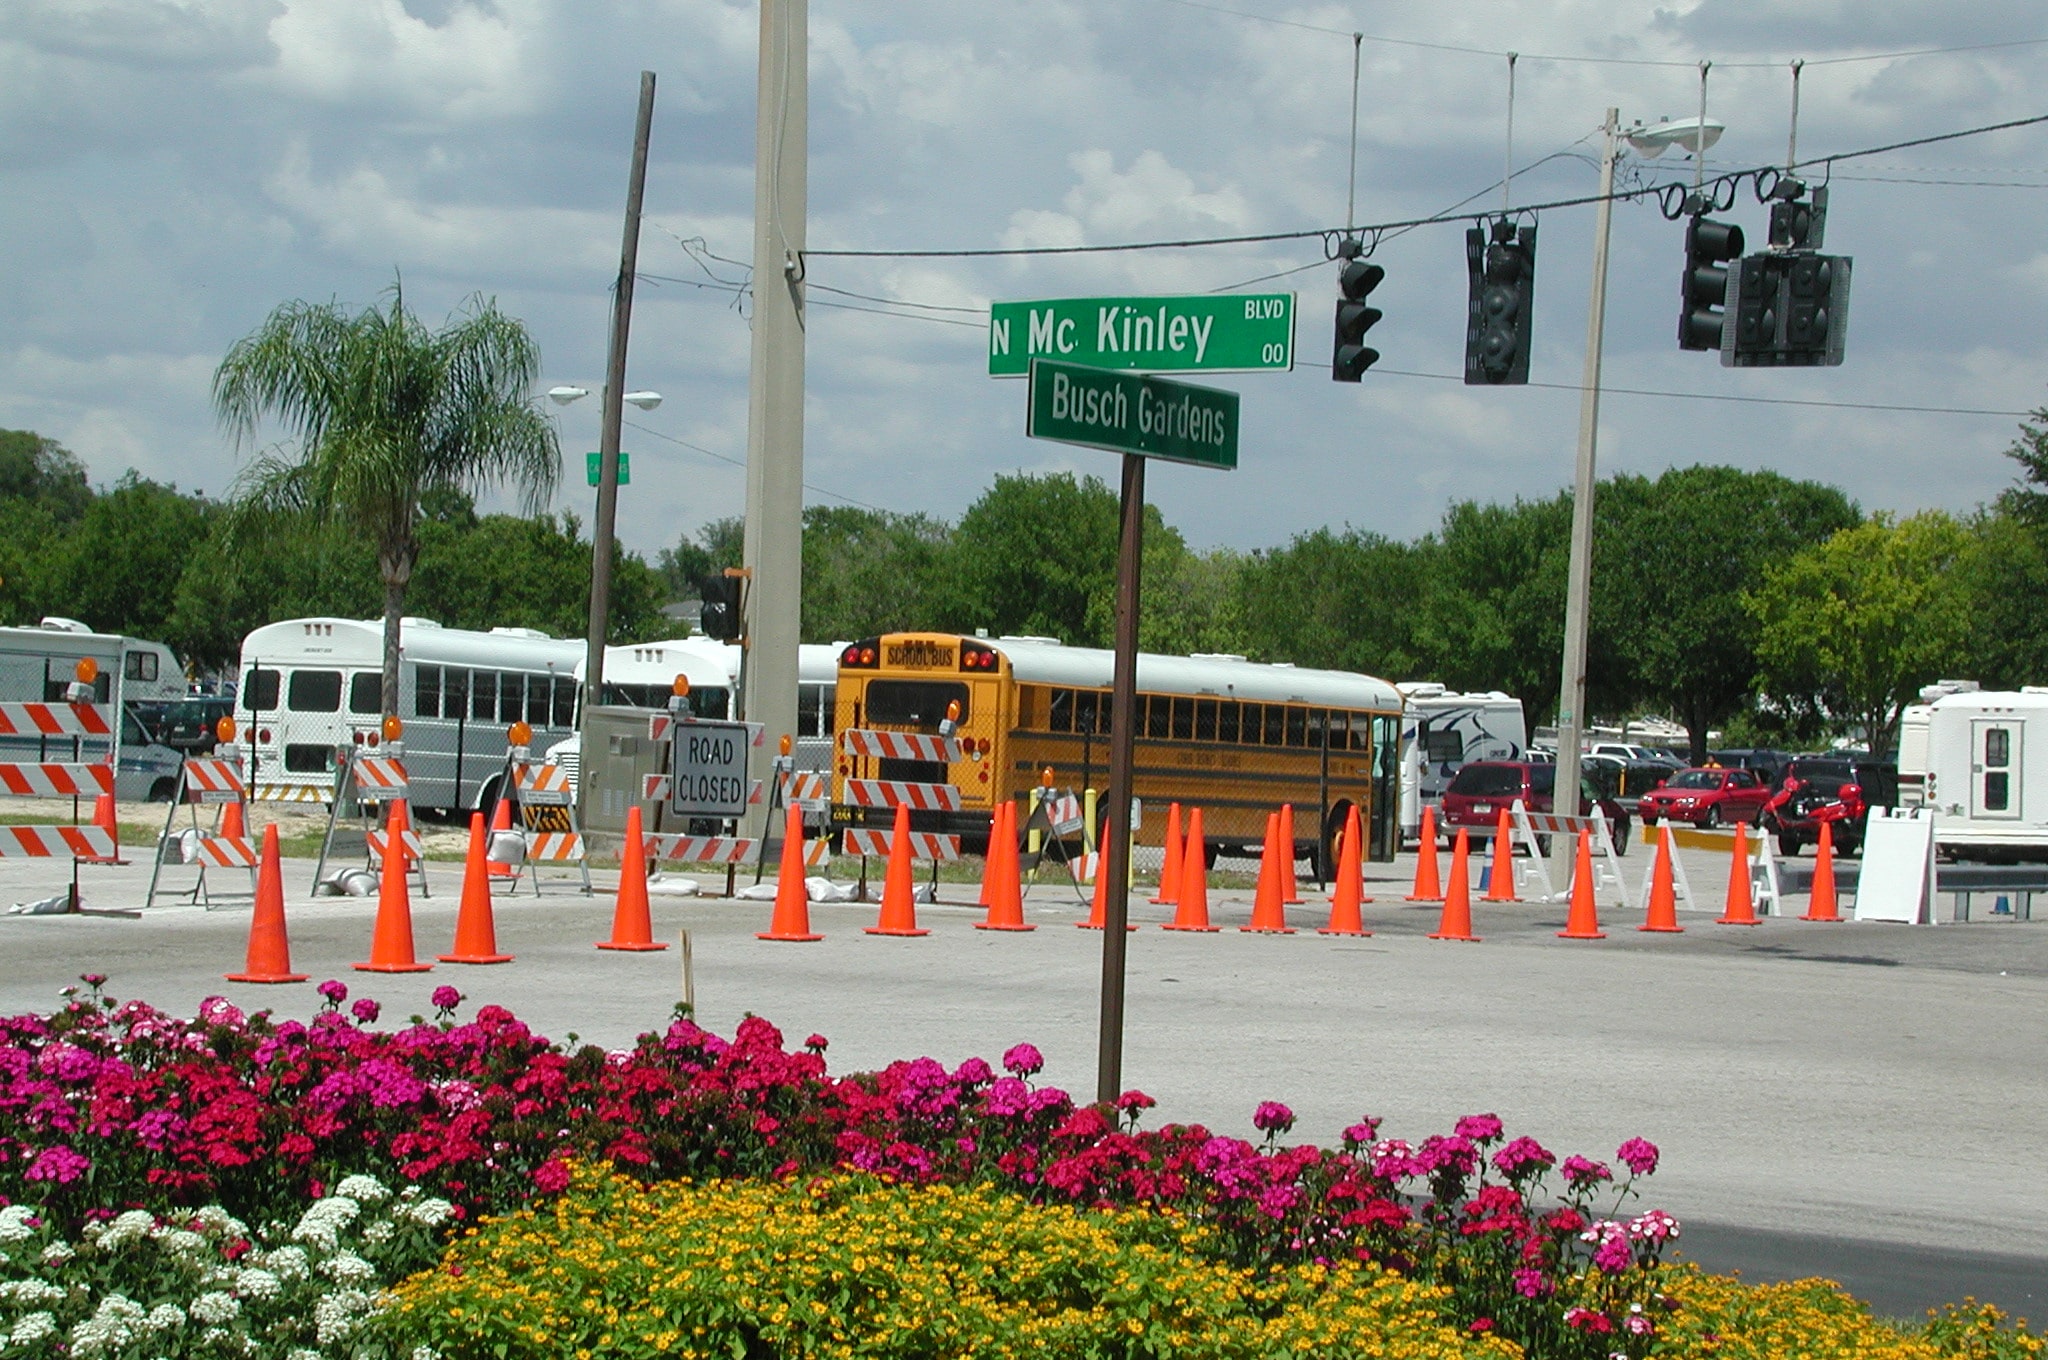 Cones on a street for traffic safety